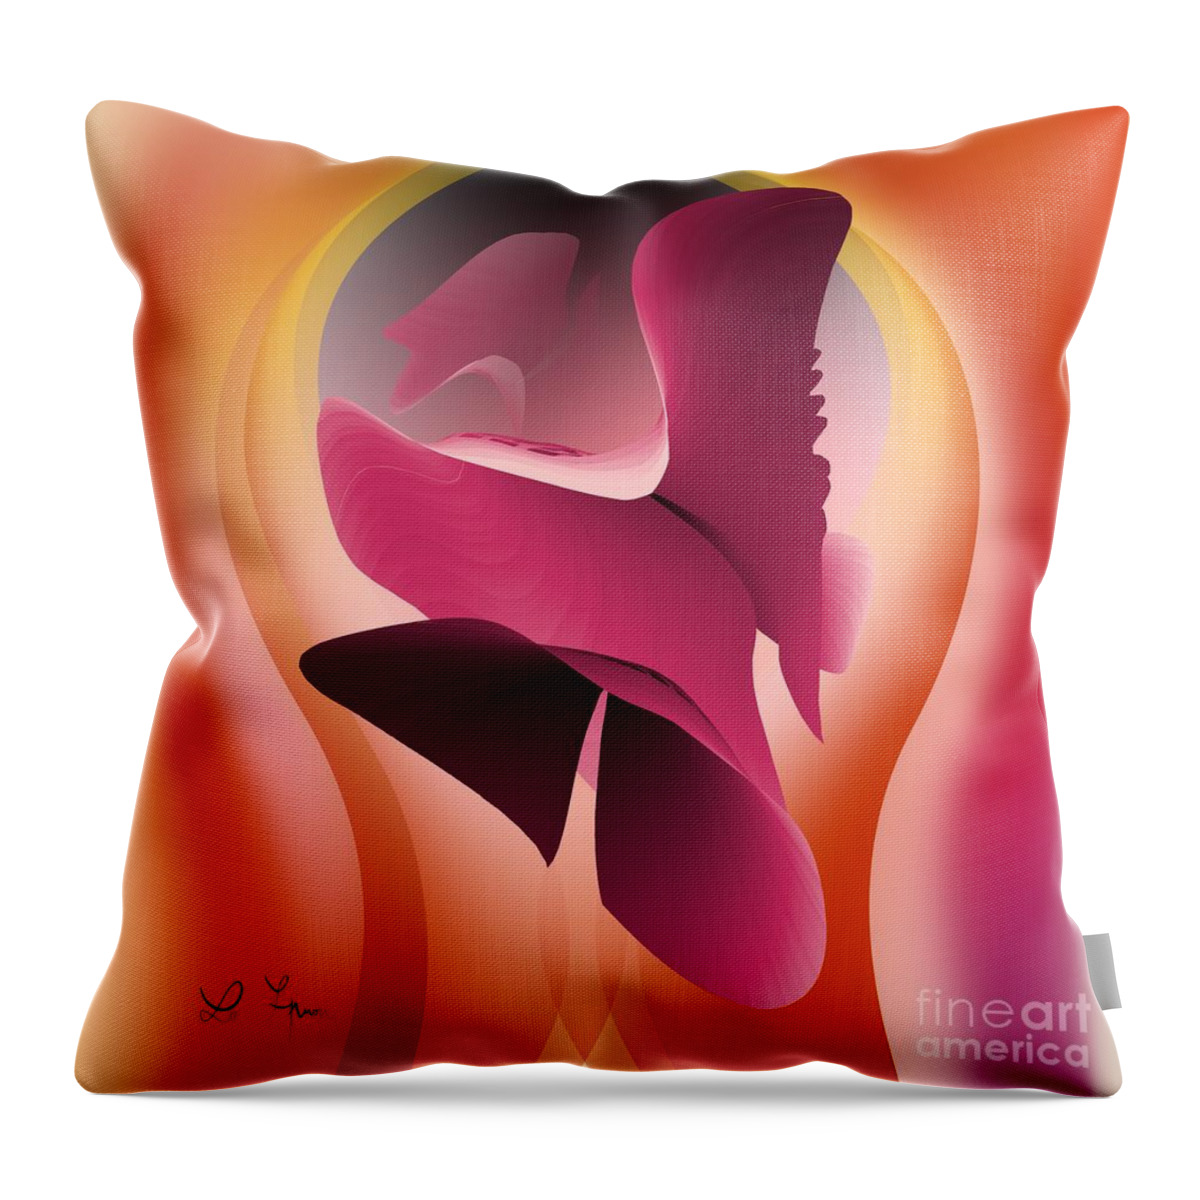 Love Throw Pillow featuring the digital art Try To Catch The Love by Leo Symon